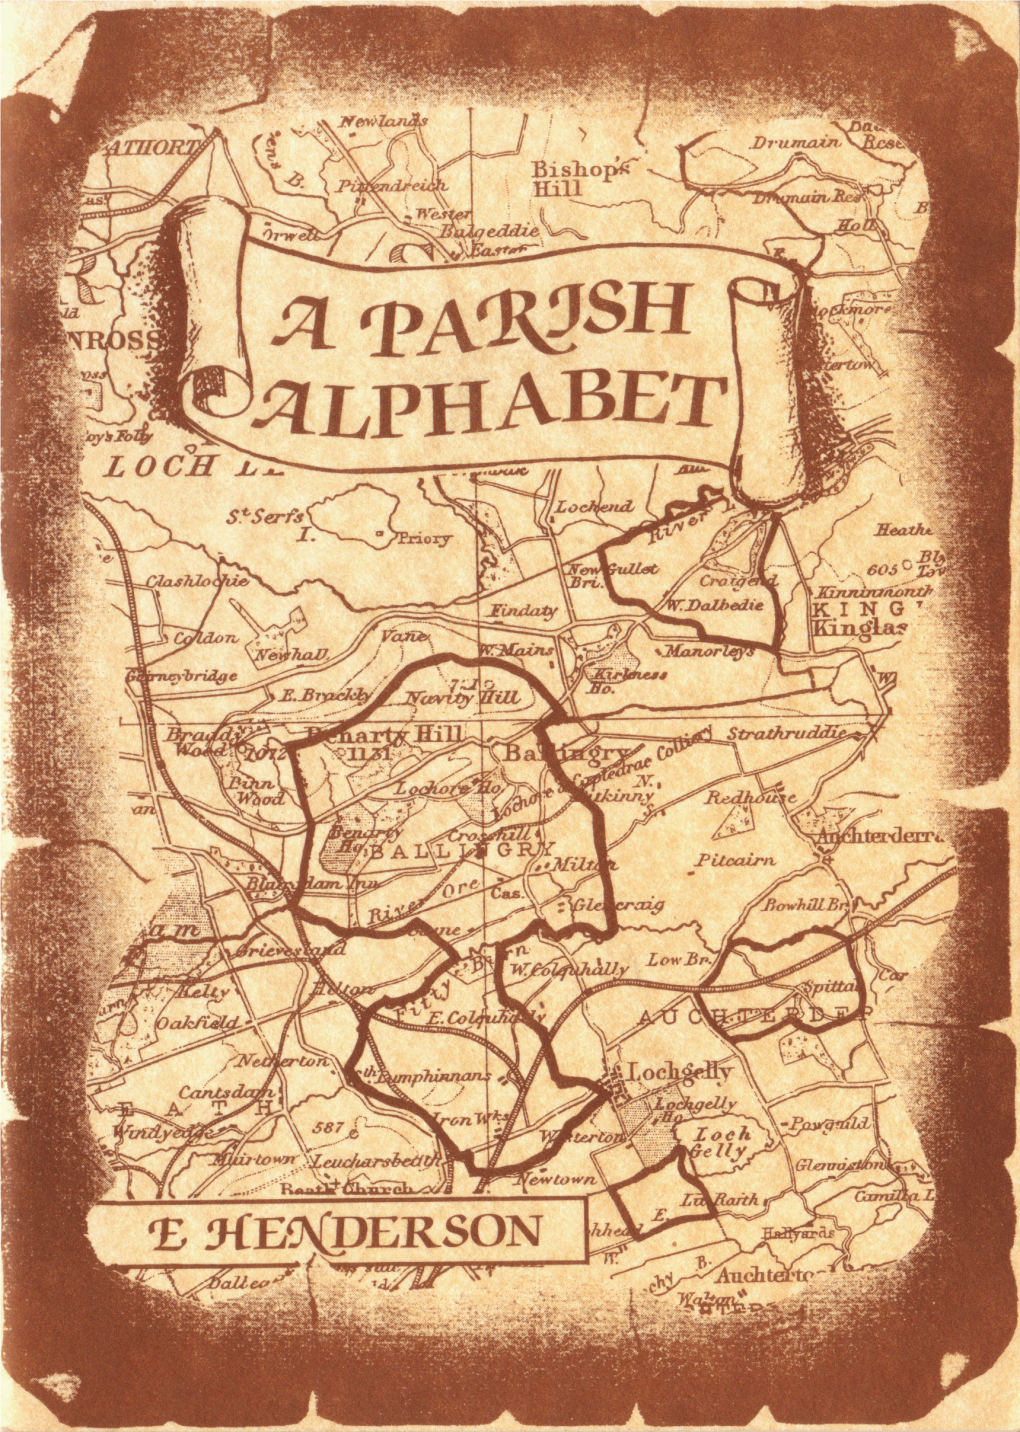 A PARISH ALPHABET Being for the Most Part an Account of the Topographical Features of the Parish of Ballingry